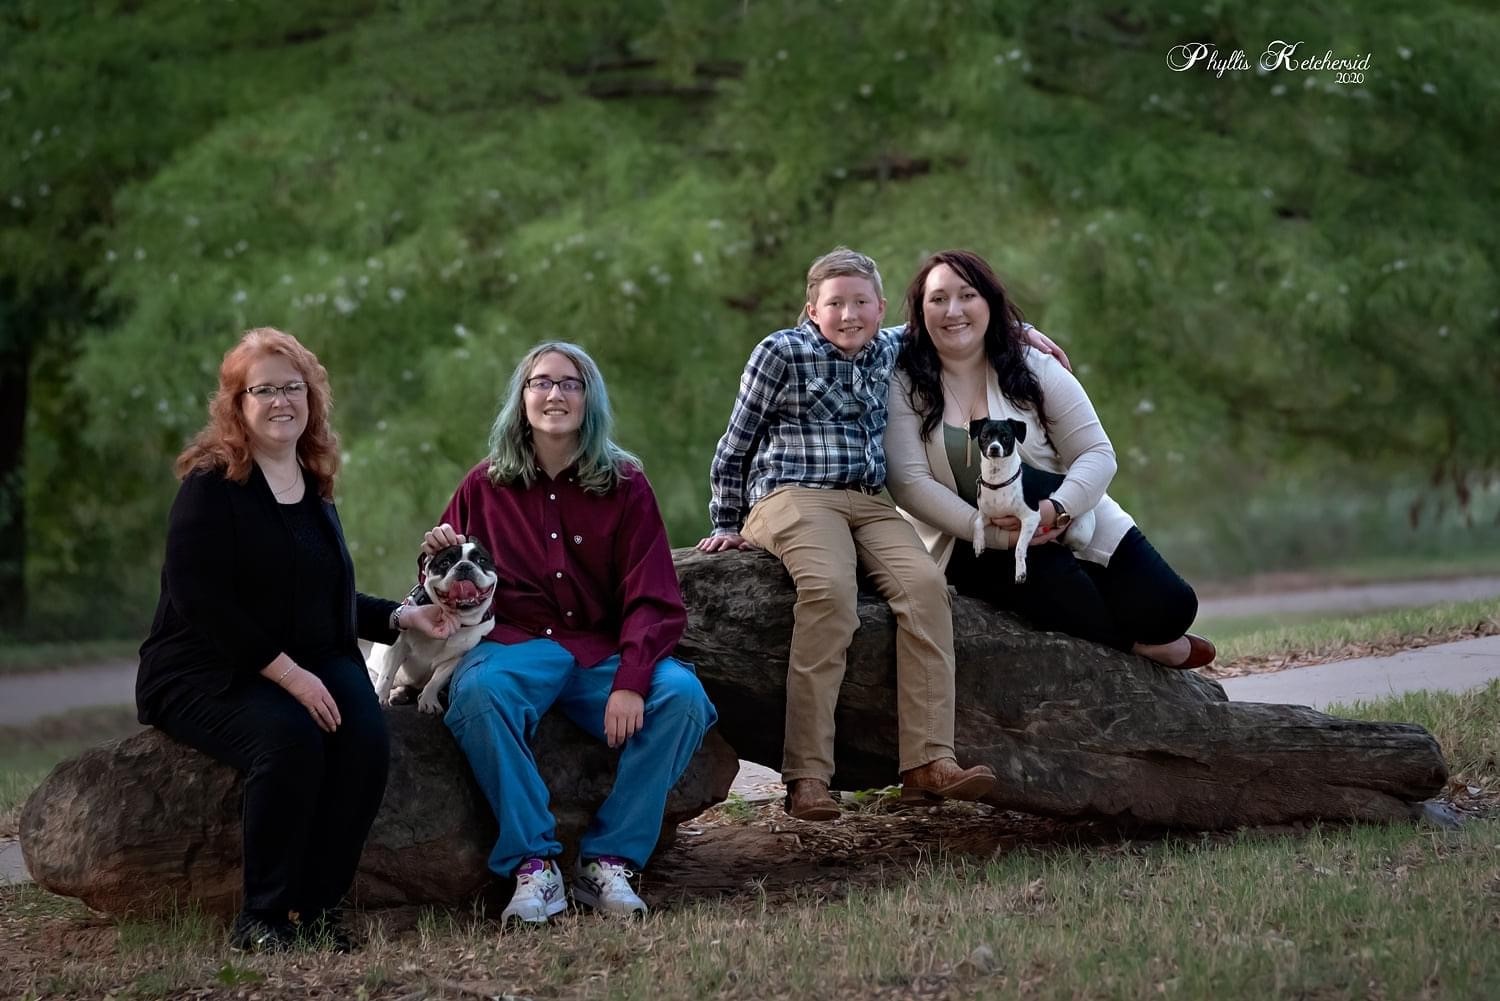 Brandi Morales with her mother, Bobbie Brown, and her sons, Morgan and Brody.